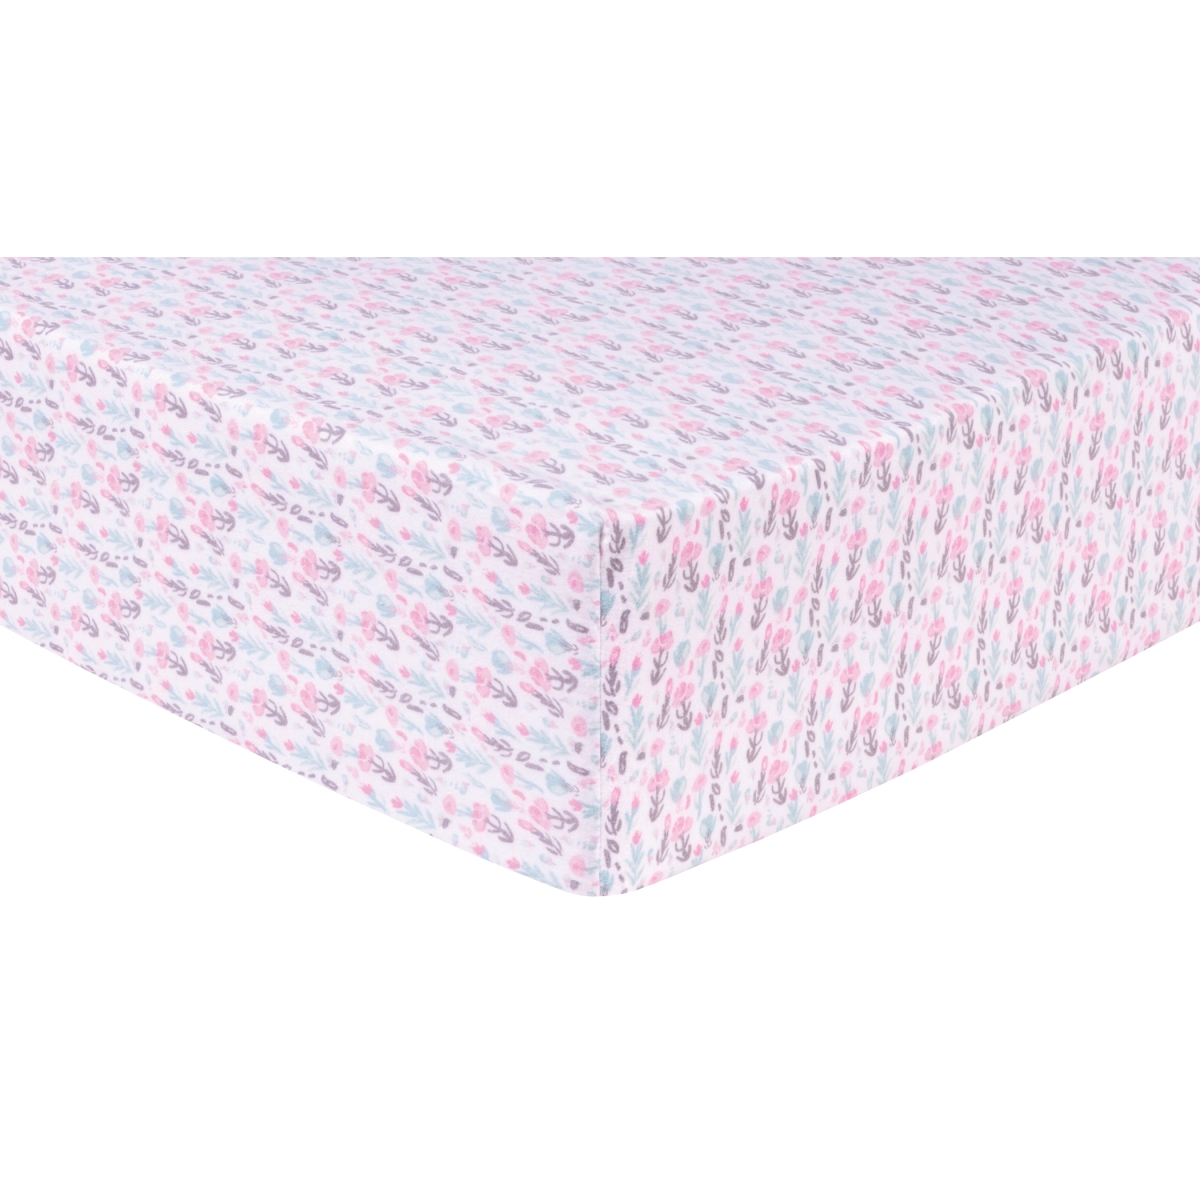 103263 28 X 52 In. Pastel Painterly Floral Deluxe Flannel Fitted Crib Sheet - Assorted Color